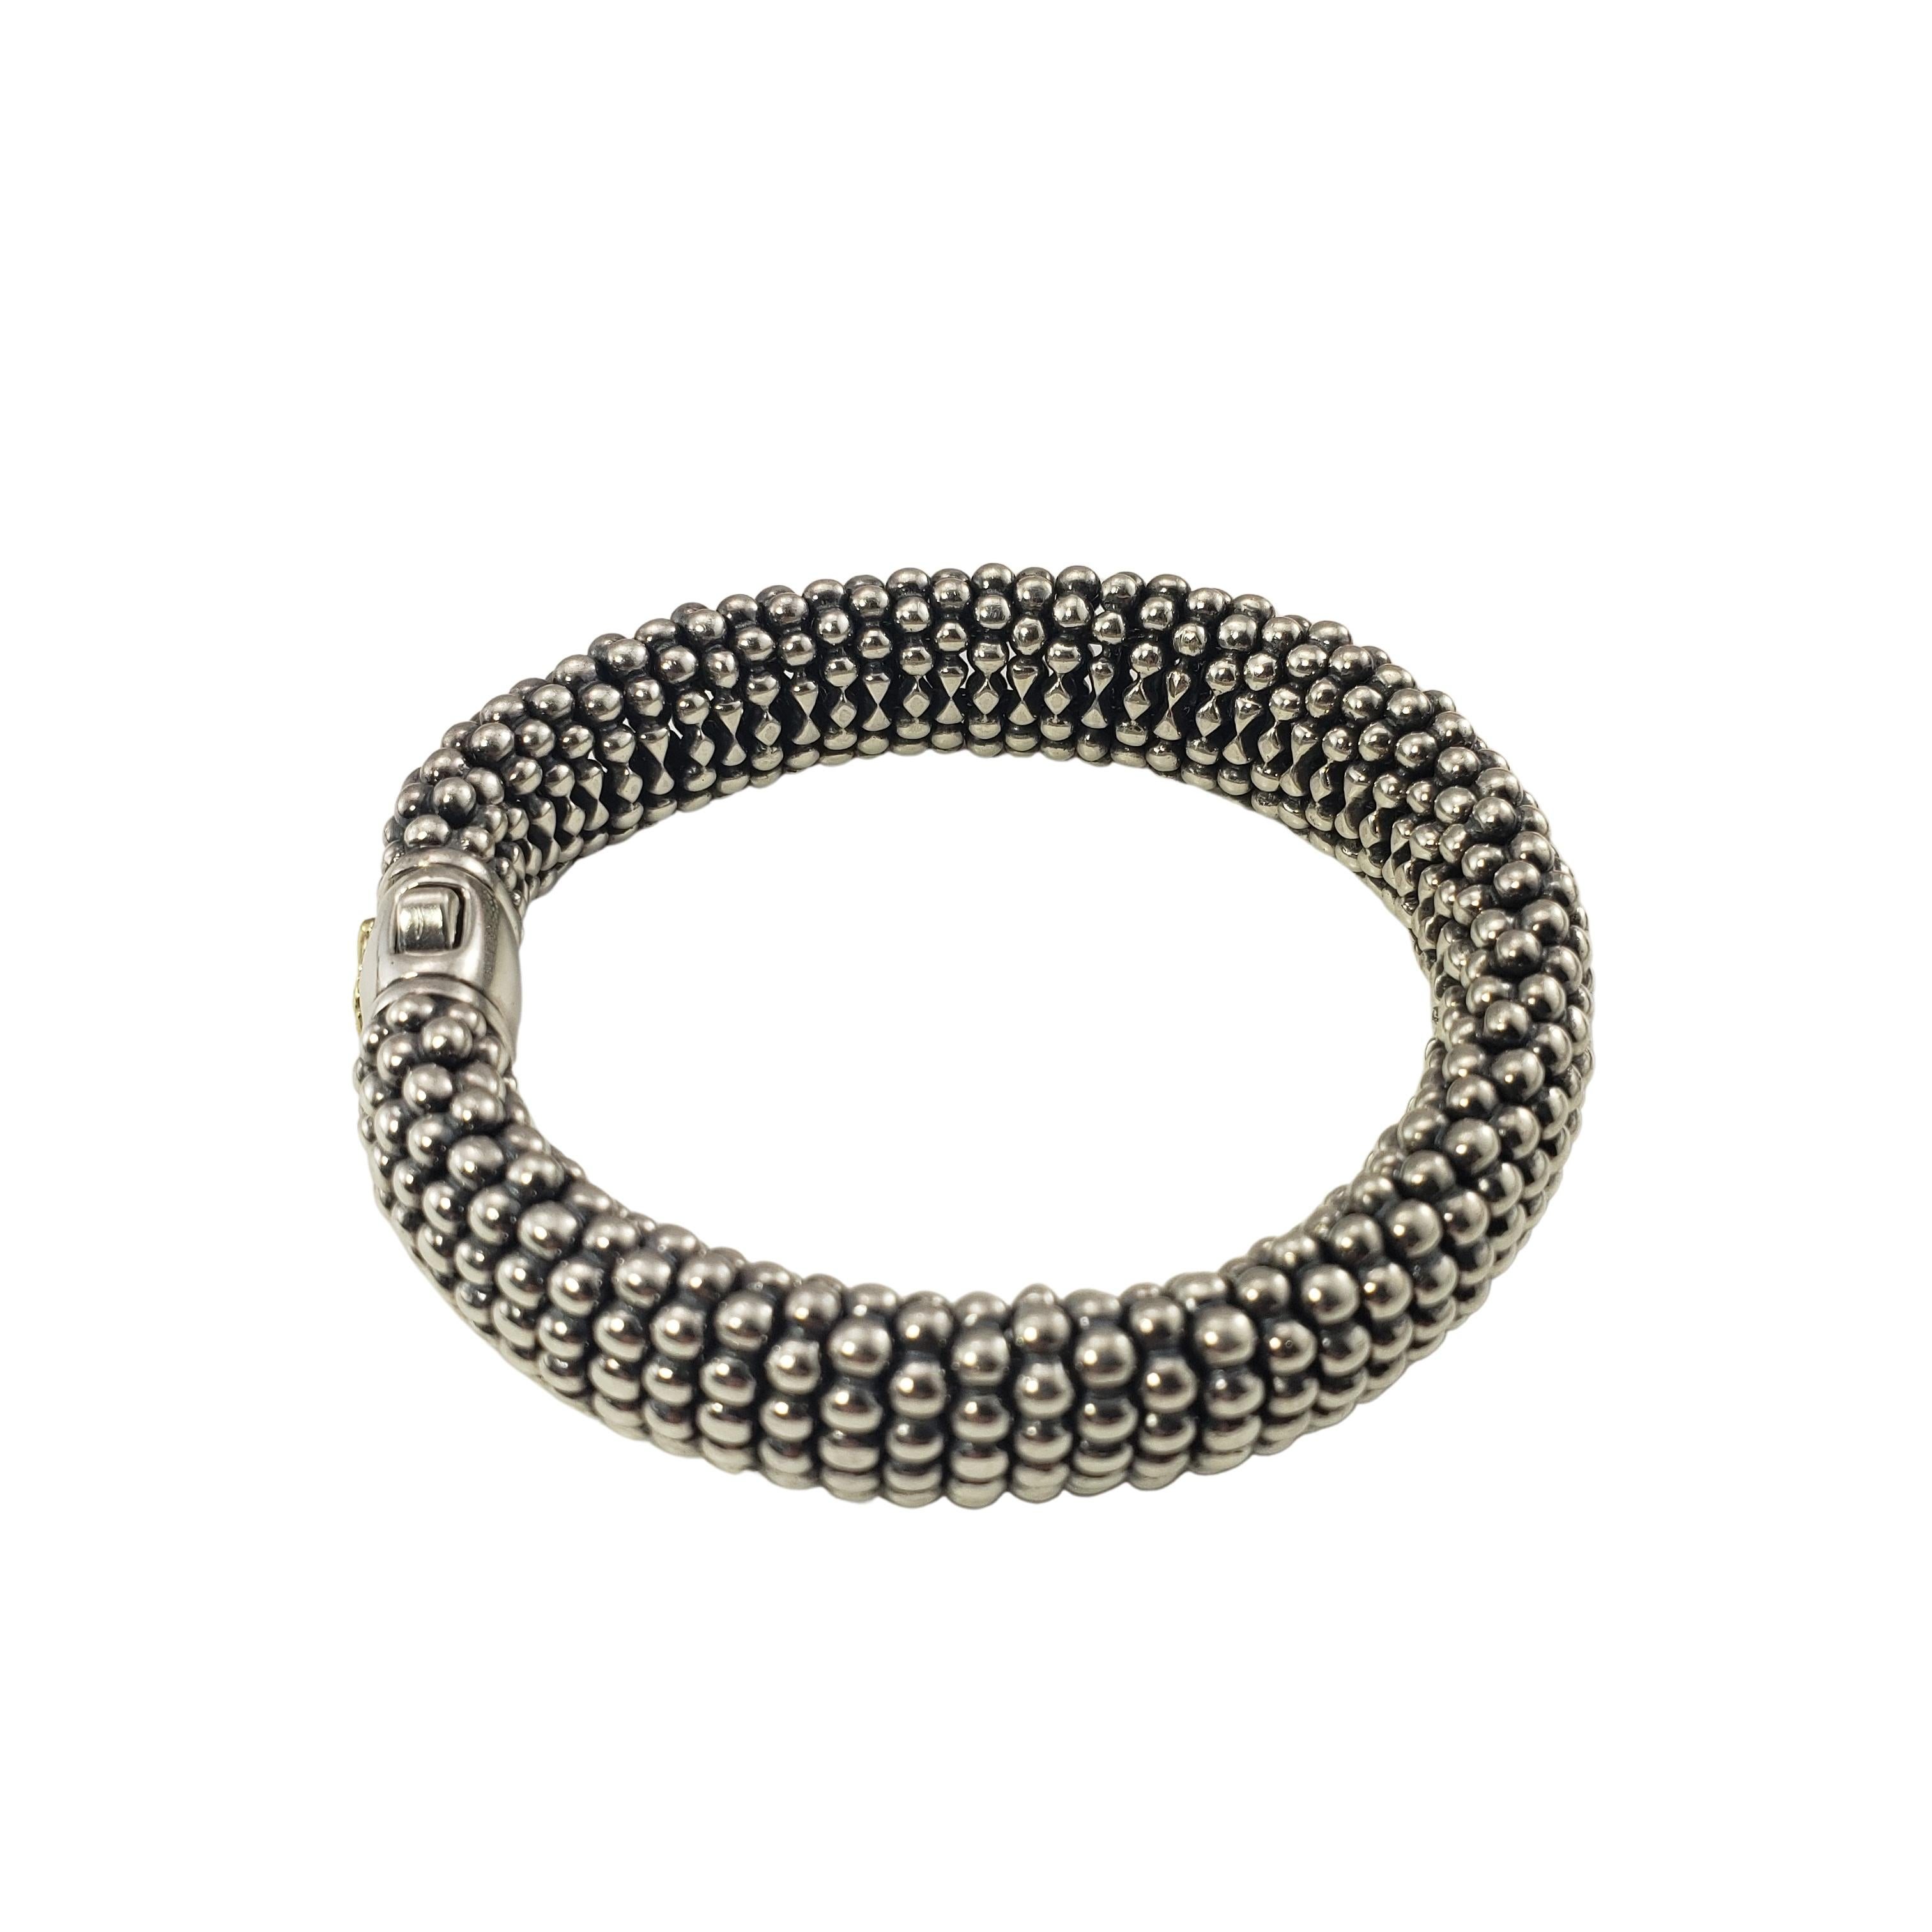 Lagos Caviar Sterling Silver and 18K Yellow Gold Beaded Bracelet-

This stunning beaded bracelet is crafted in beautifully sterling silver and accented with an 18K yellow gold emblem on closure.
Width:  14 mm.

Size: 7.75

Weight:  59.7 dwt. /  93.0